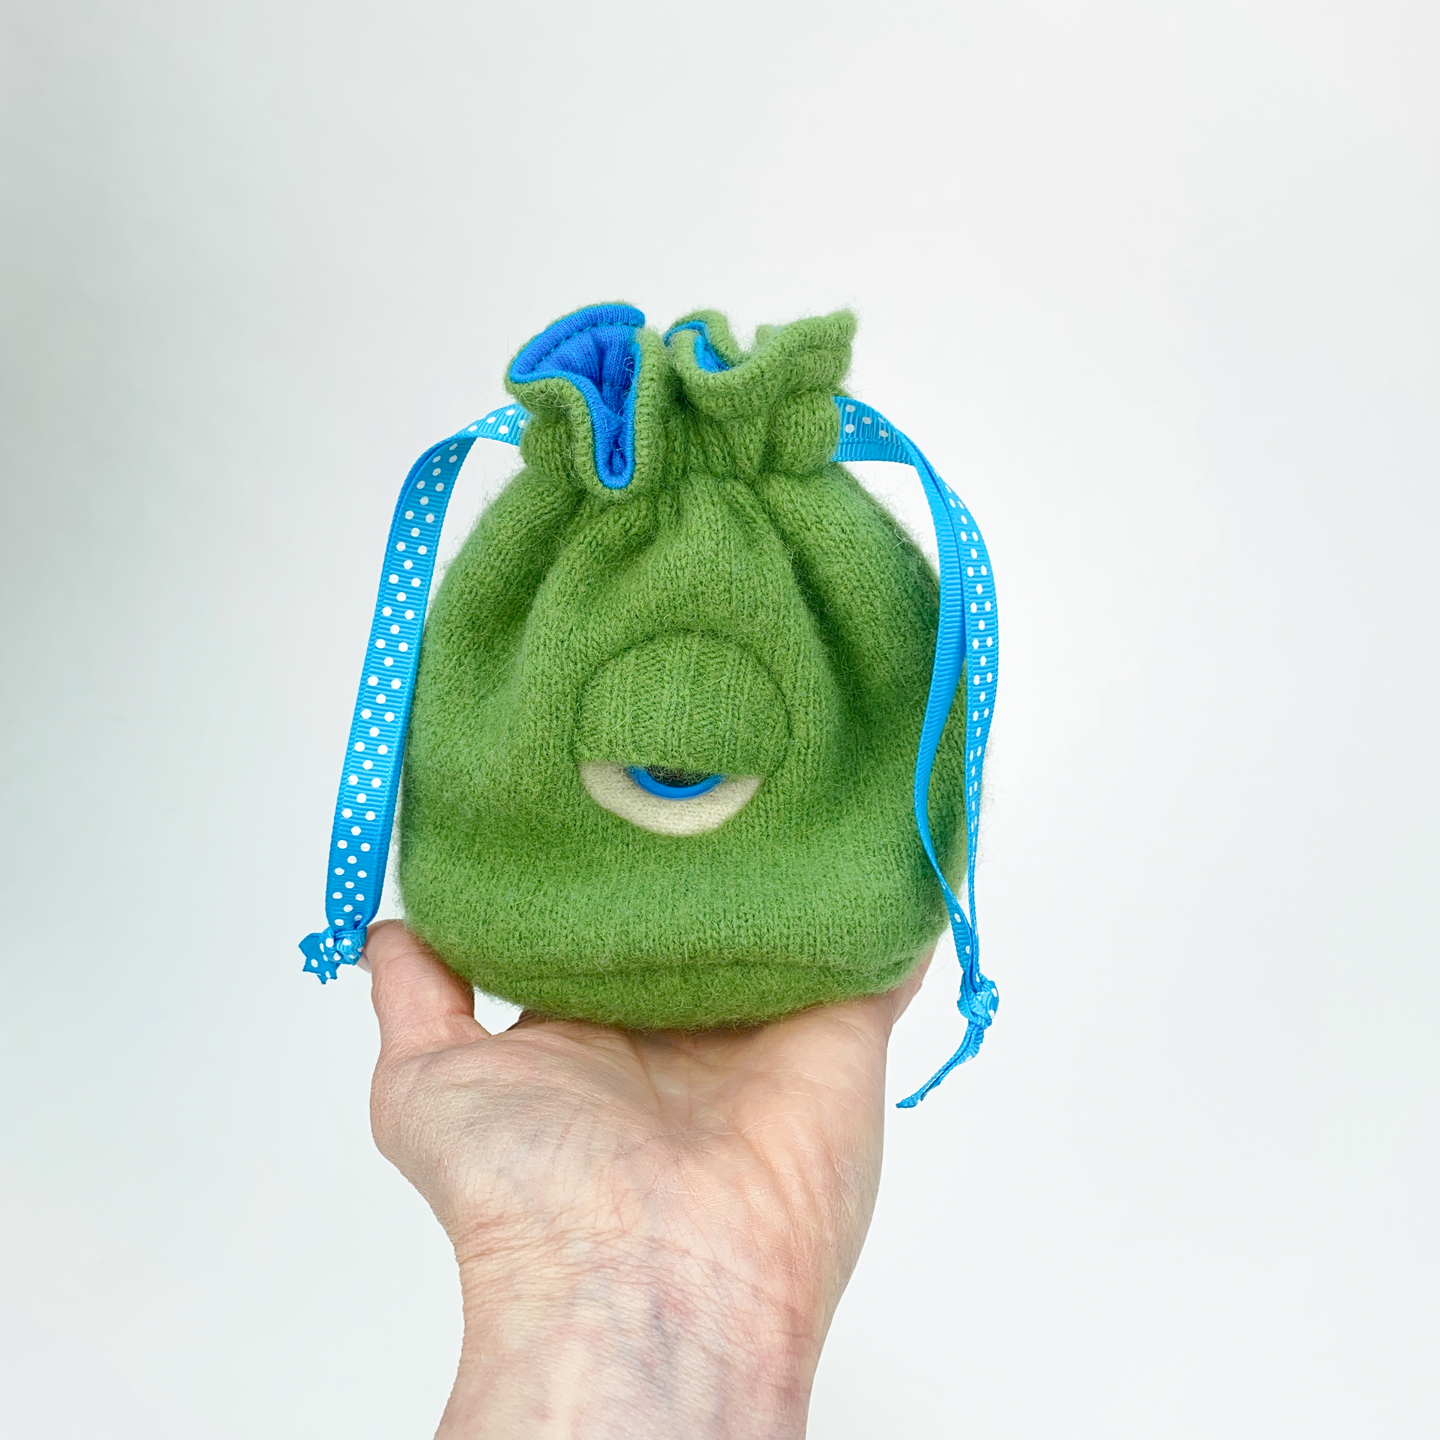 Green monster cyclops drawstring dice bag for role playing games